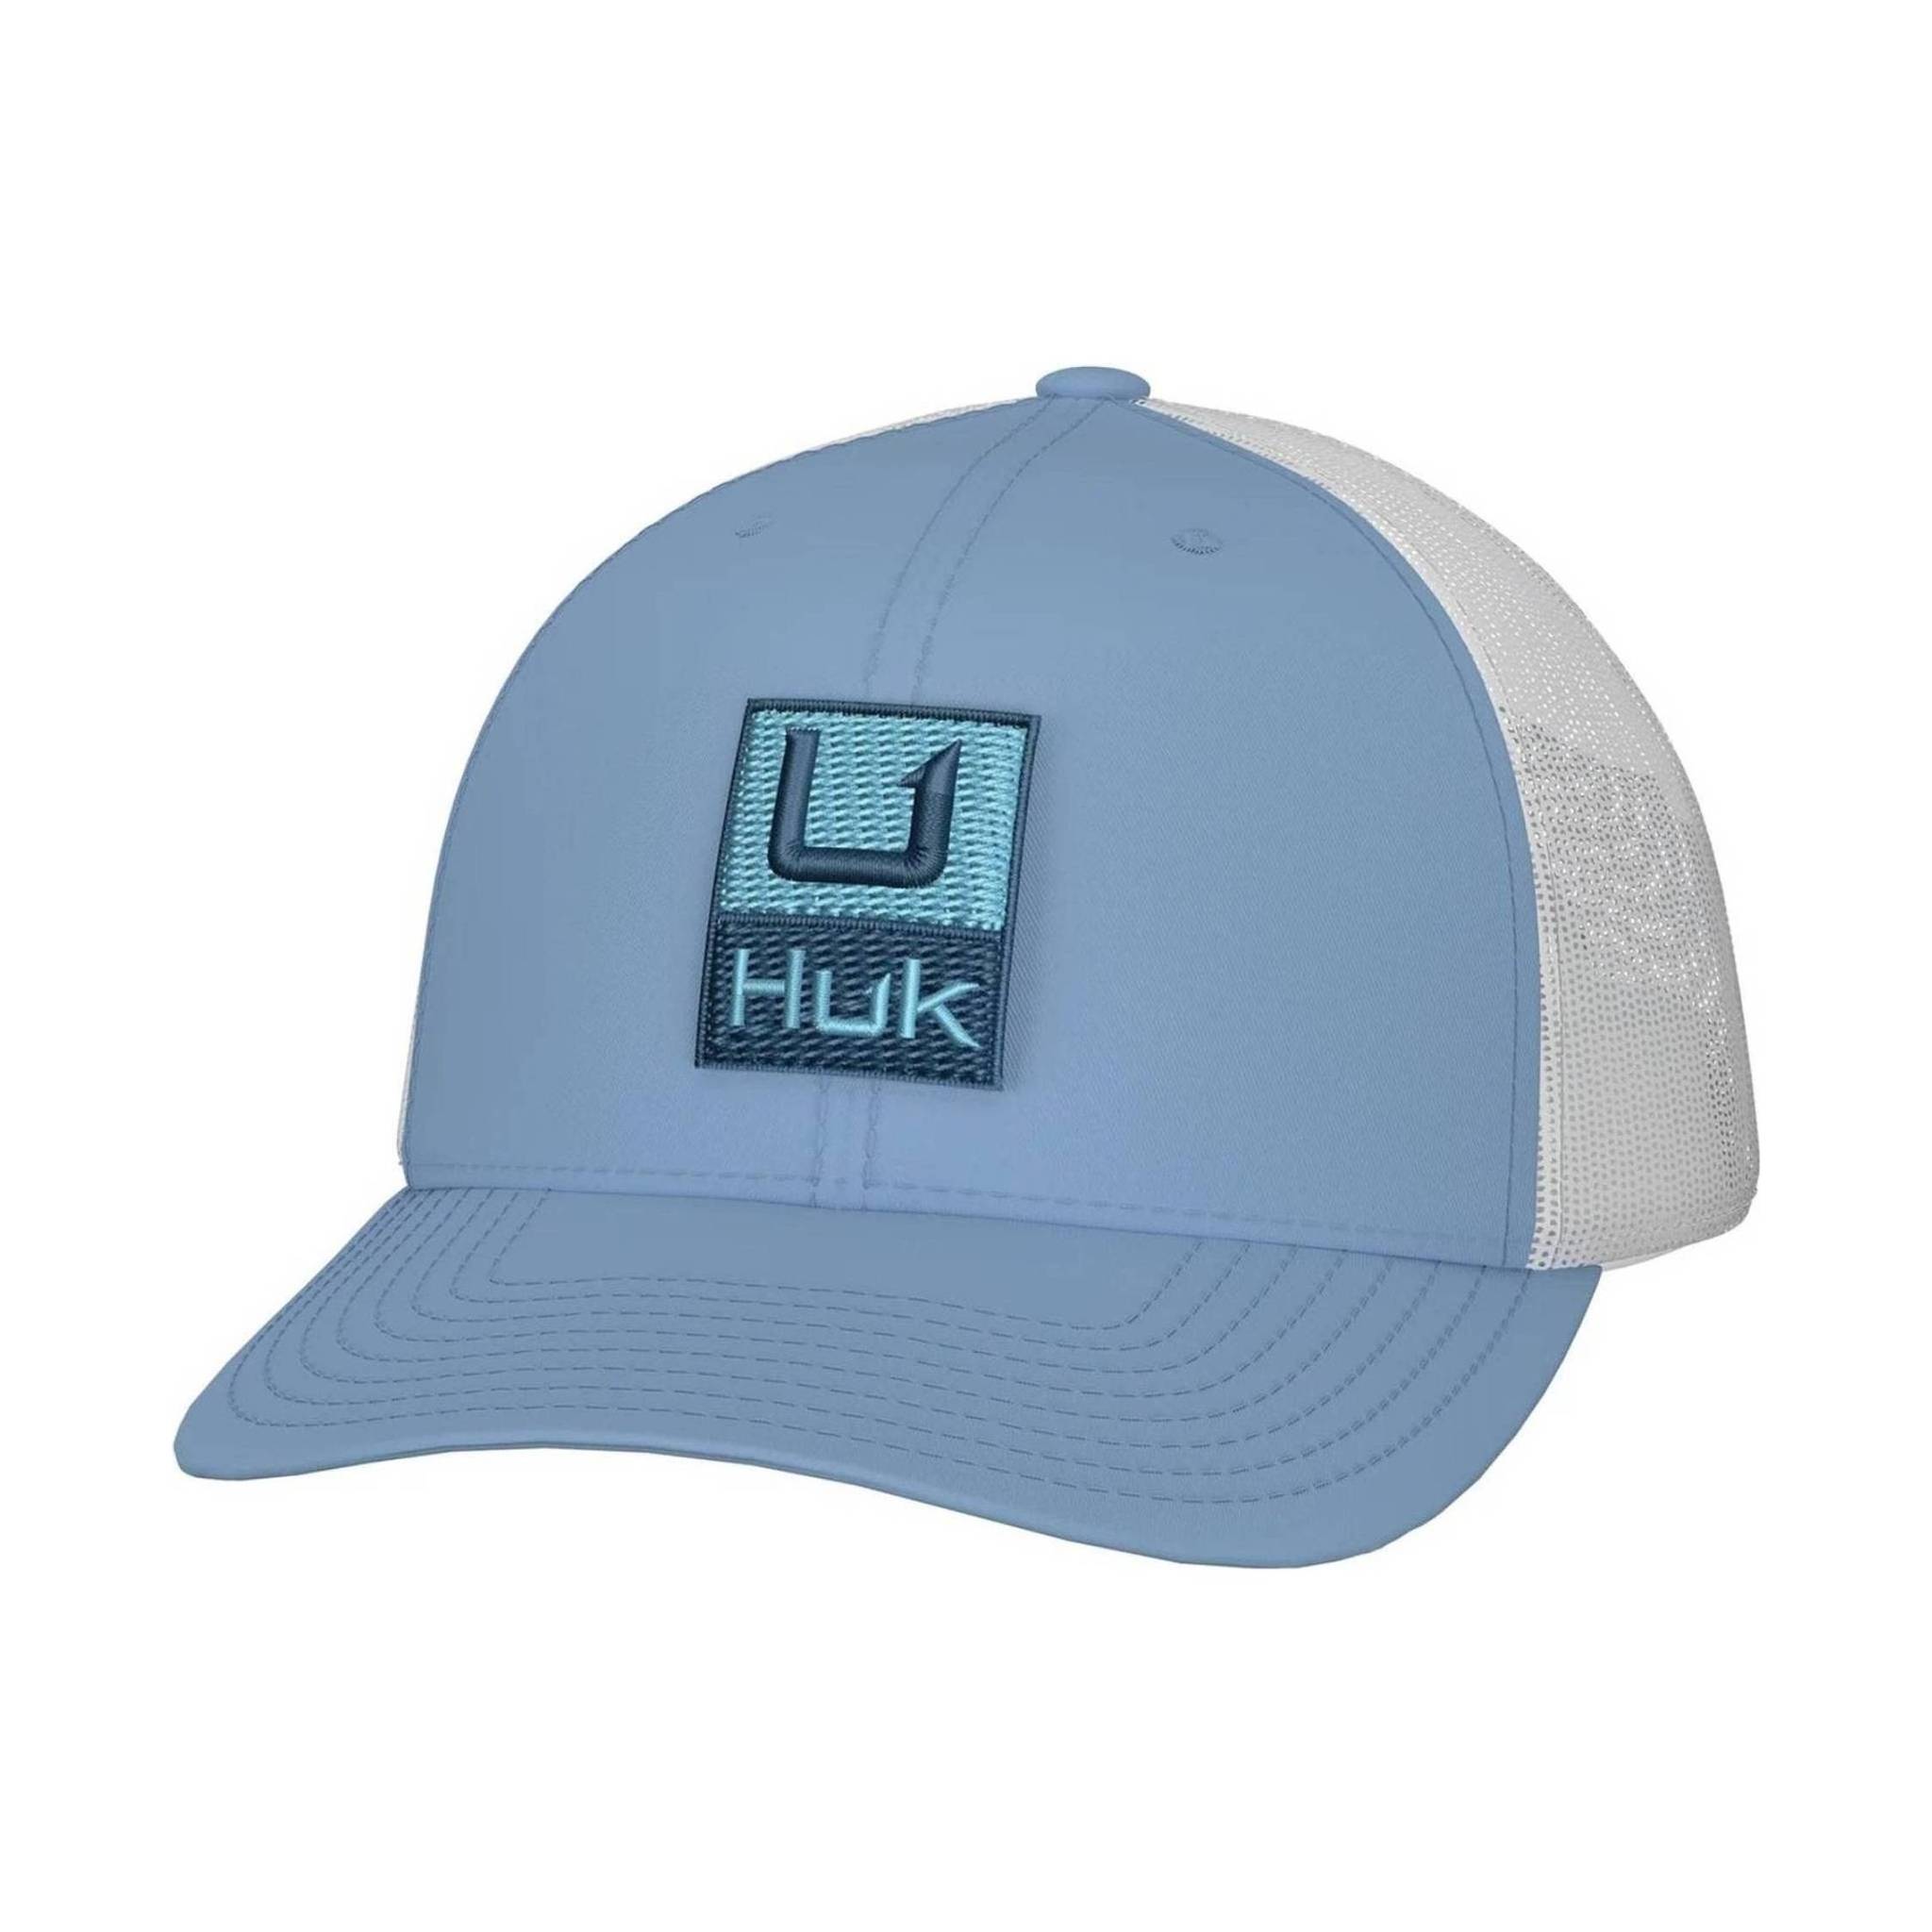 Huk'd Up Trucker Hat - Crystal Blue One Size